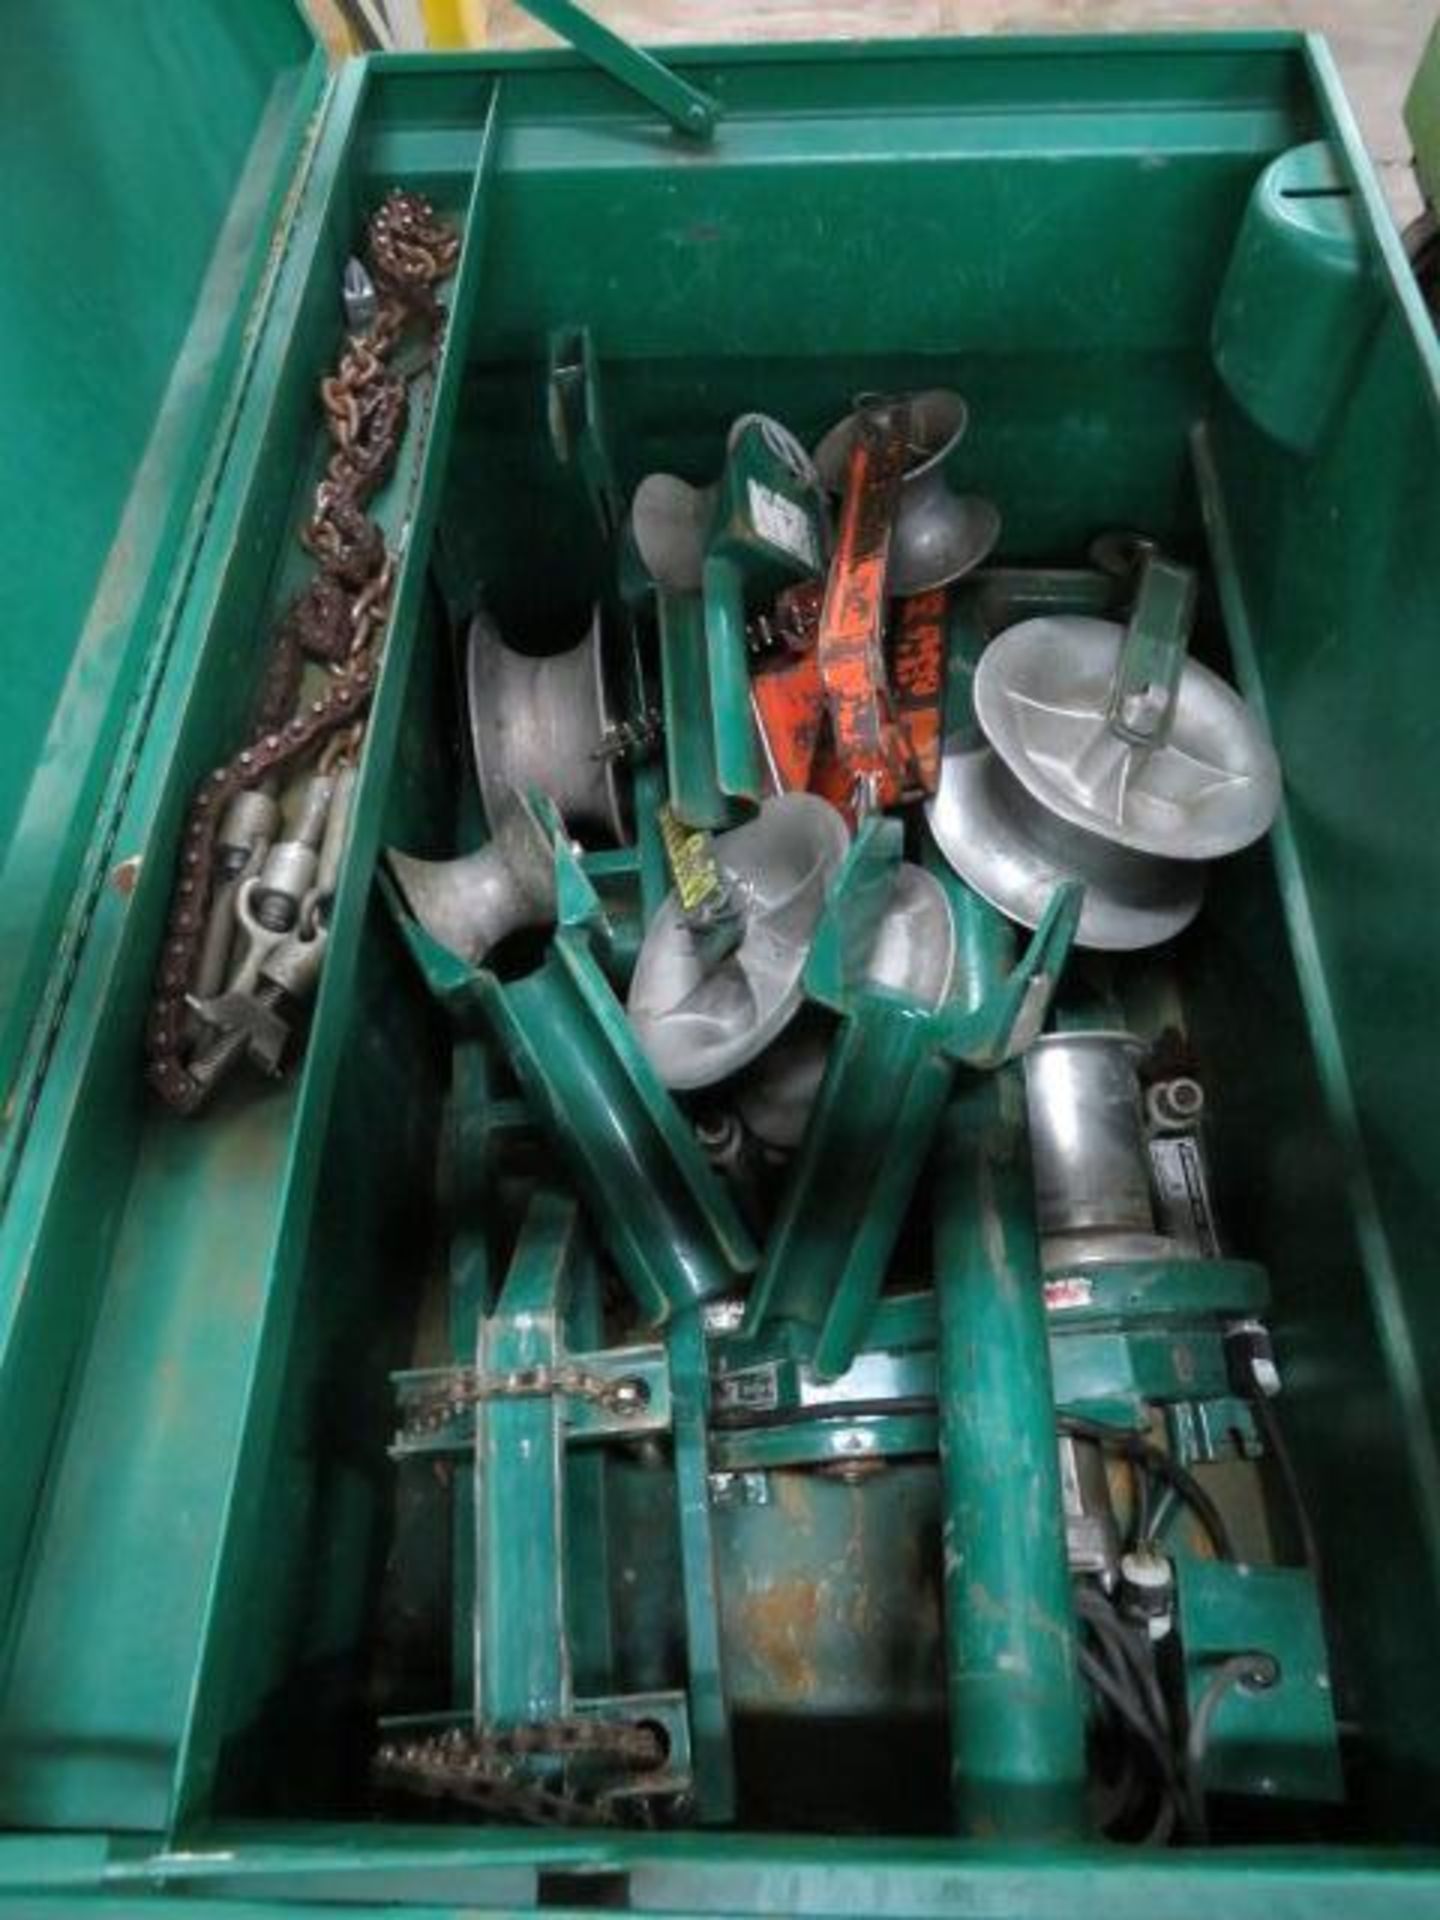 LOT: Greenlee 4000 lb. Hydraulic Cable Pulling System No. 686, with Portable Case